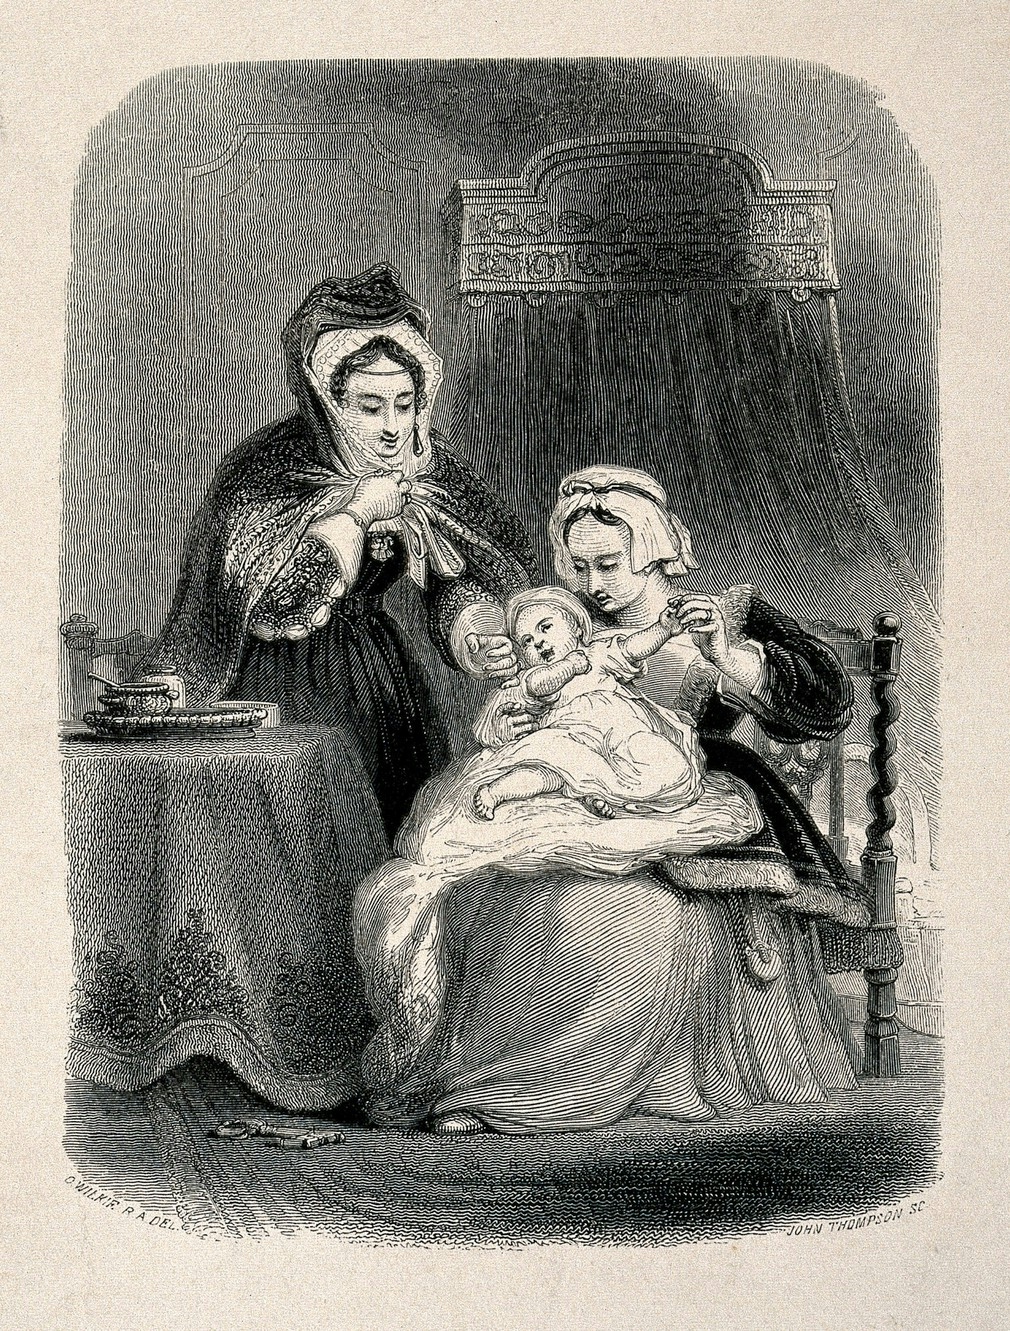 Monochrome etching of a female servant holding a small child while its fashionably dressed mother touches its face on her way out